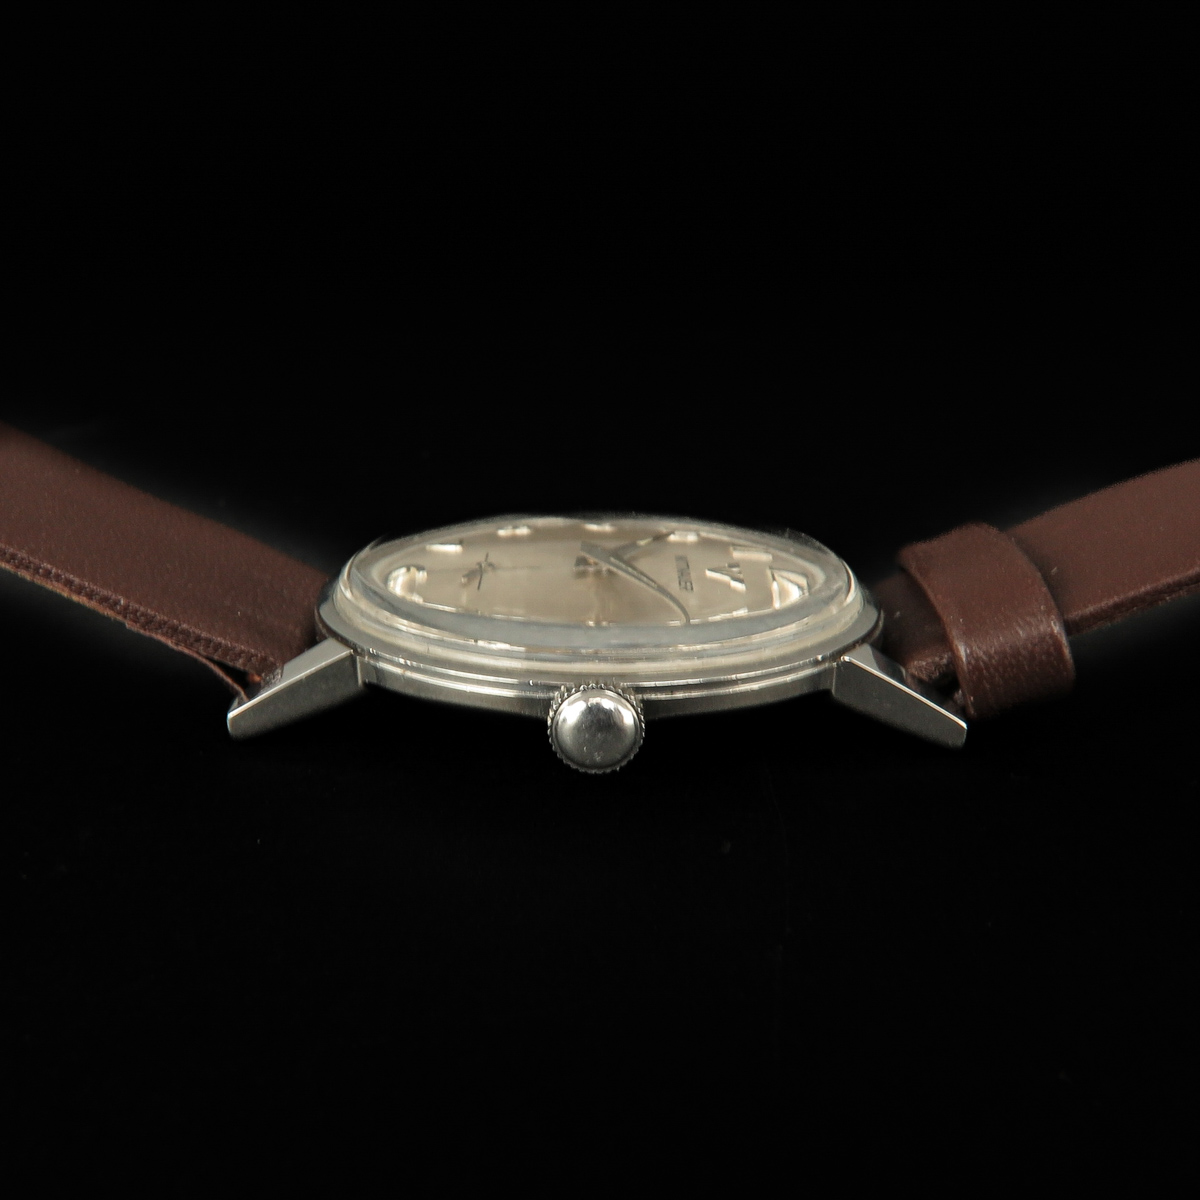 A Mens Wittnauer Watch - Image 5 of 6